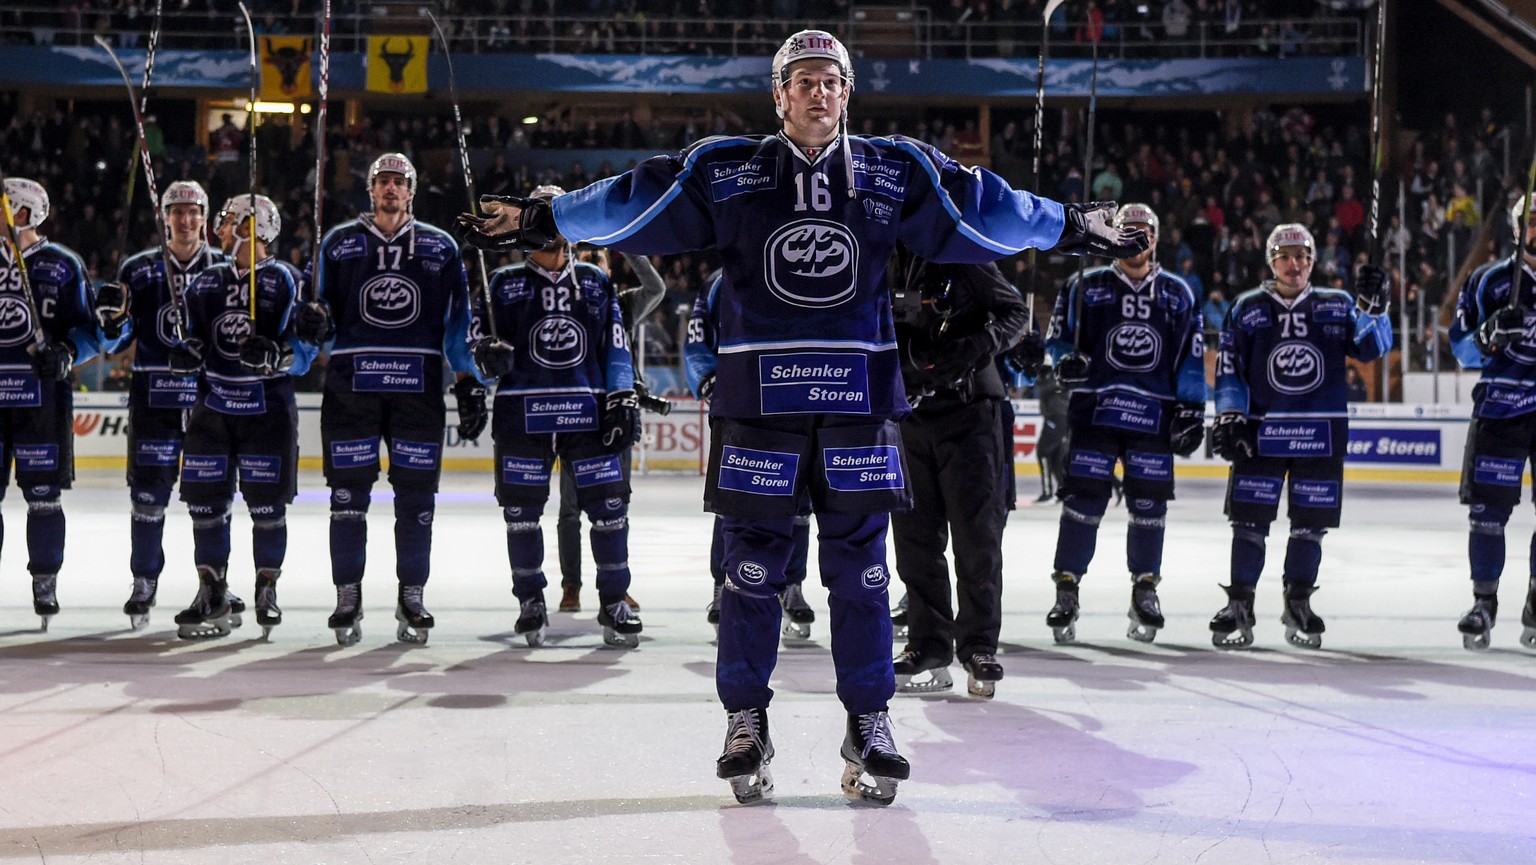 Ambri&#039;s Dominik Zwerger and the team after winning the game between HC Ambri-Piotta and TPS Turku, at the 93th Spengler Cup ice hockey tournament in Davos, Switzerland, Saturday, December 28, 201 ...